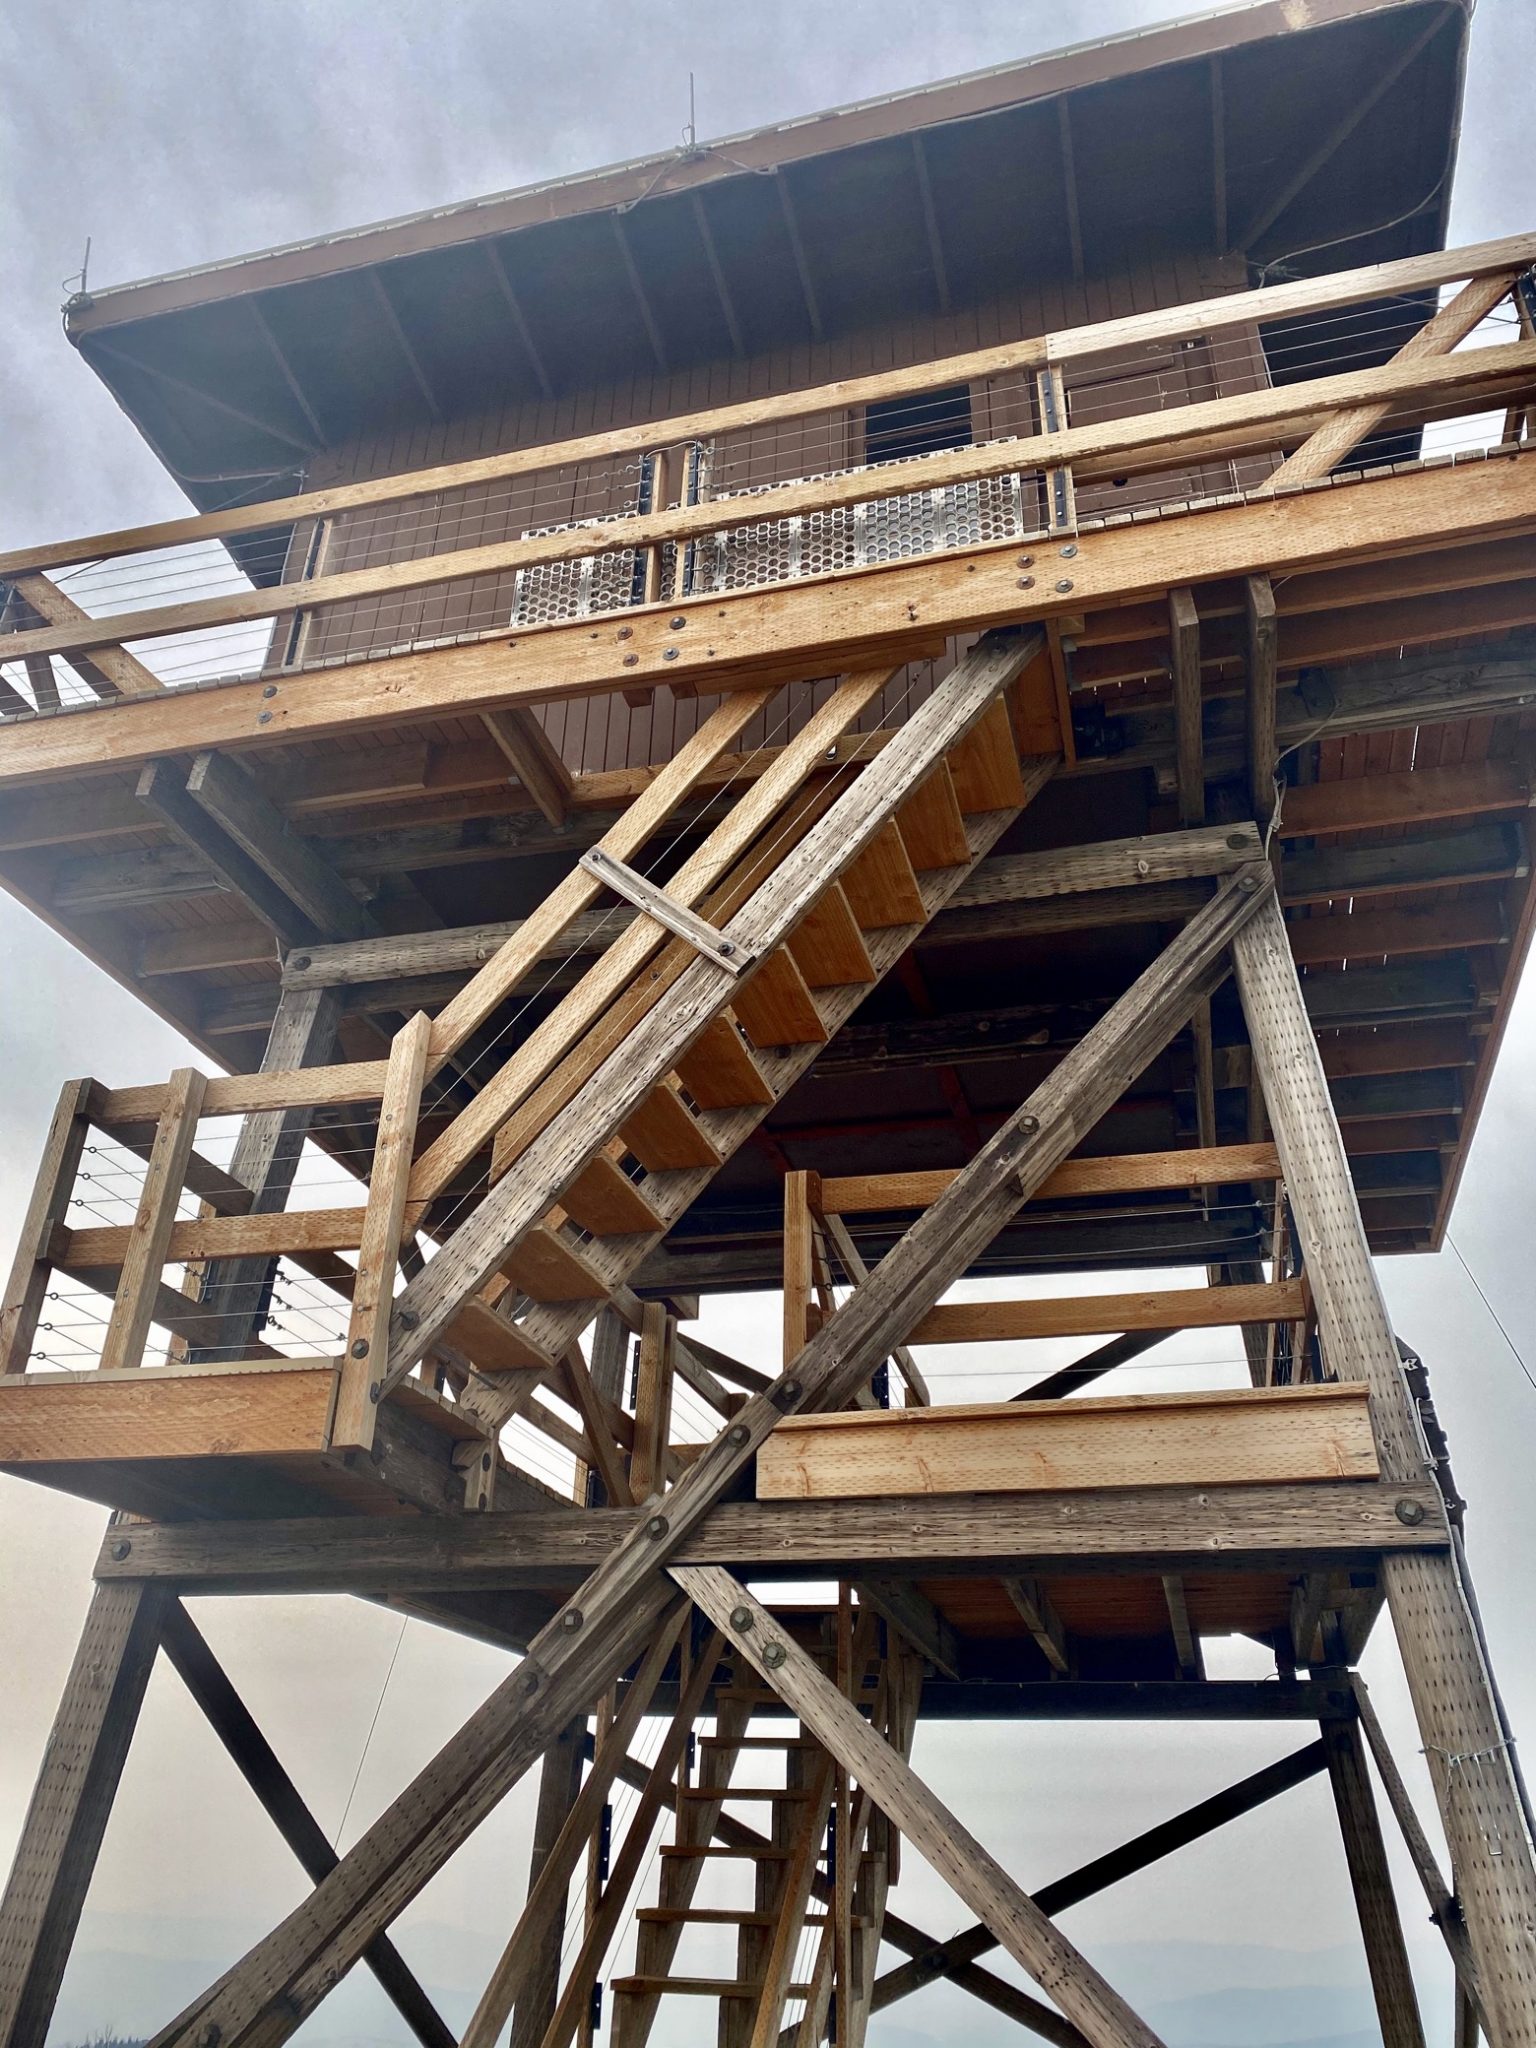 Fire tower up close